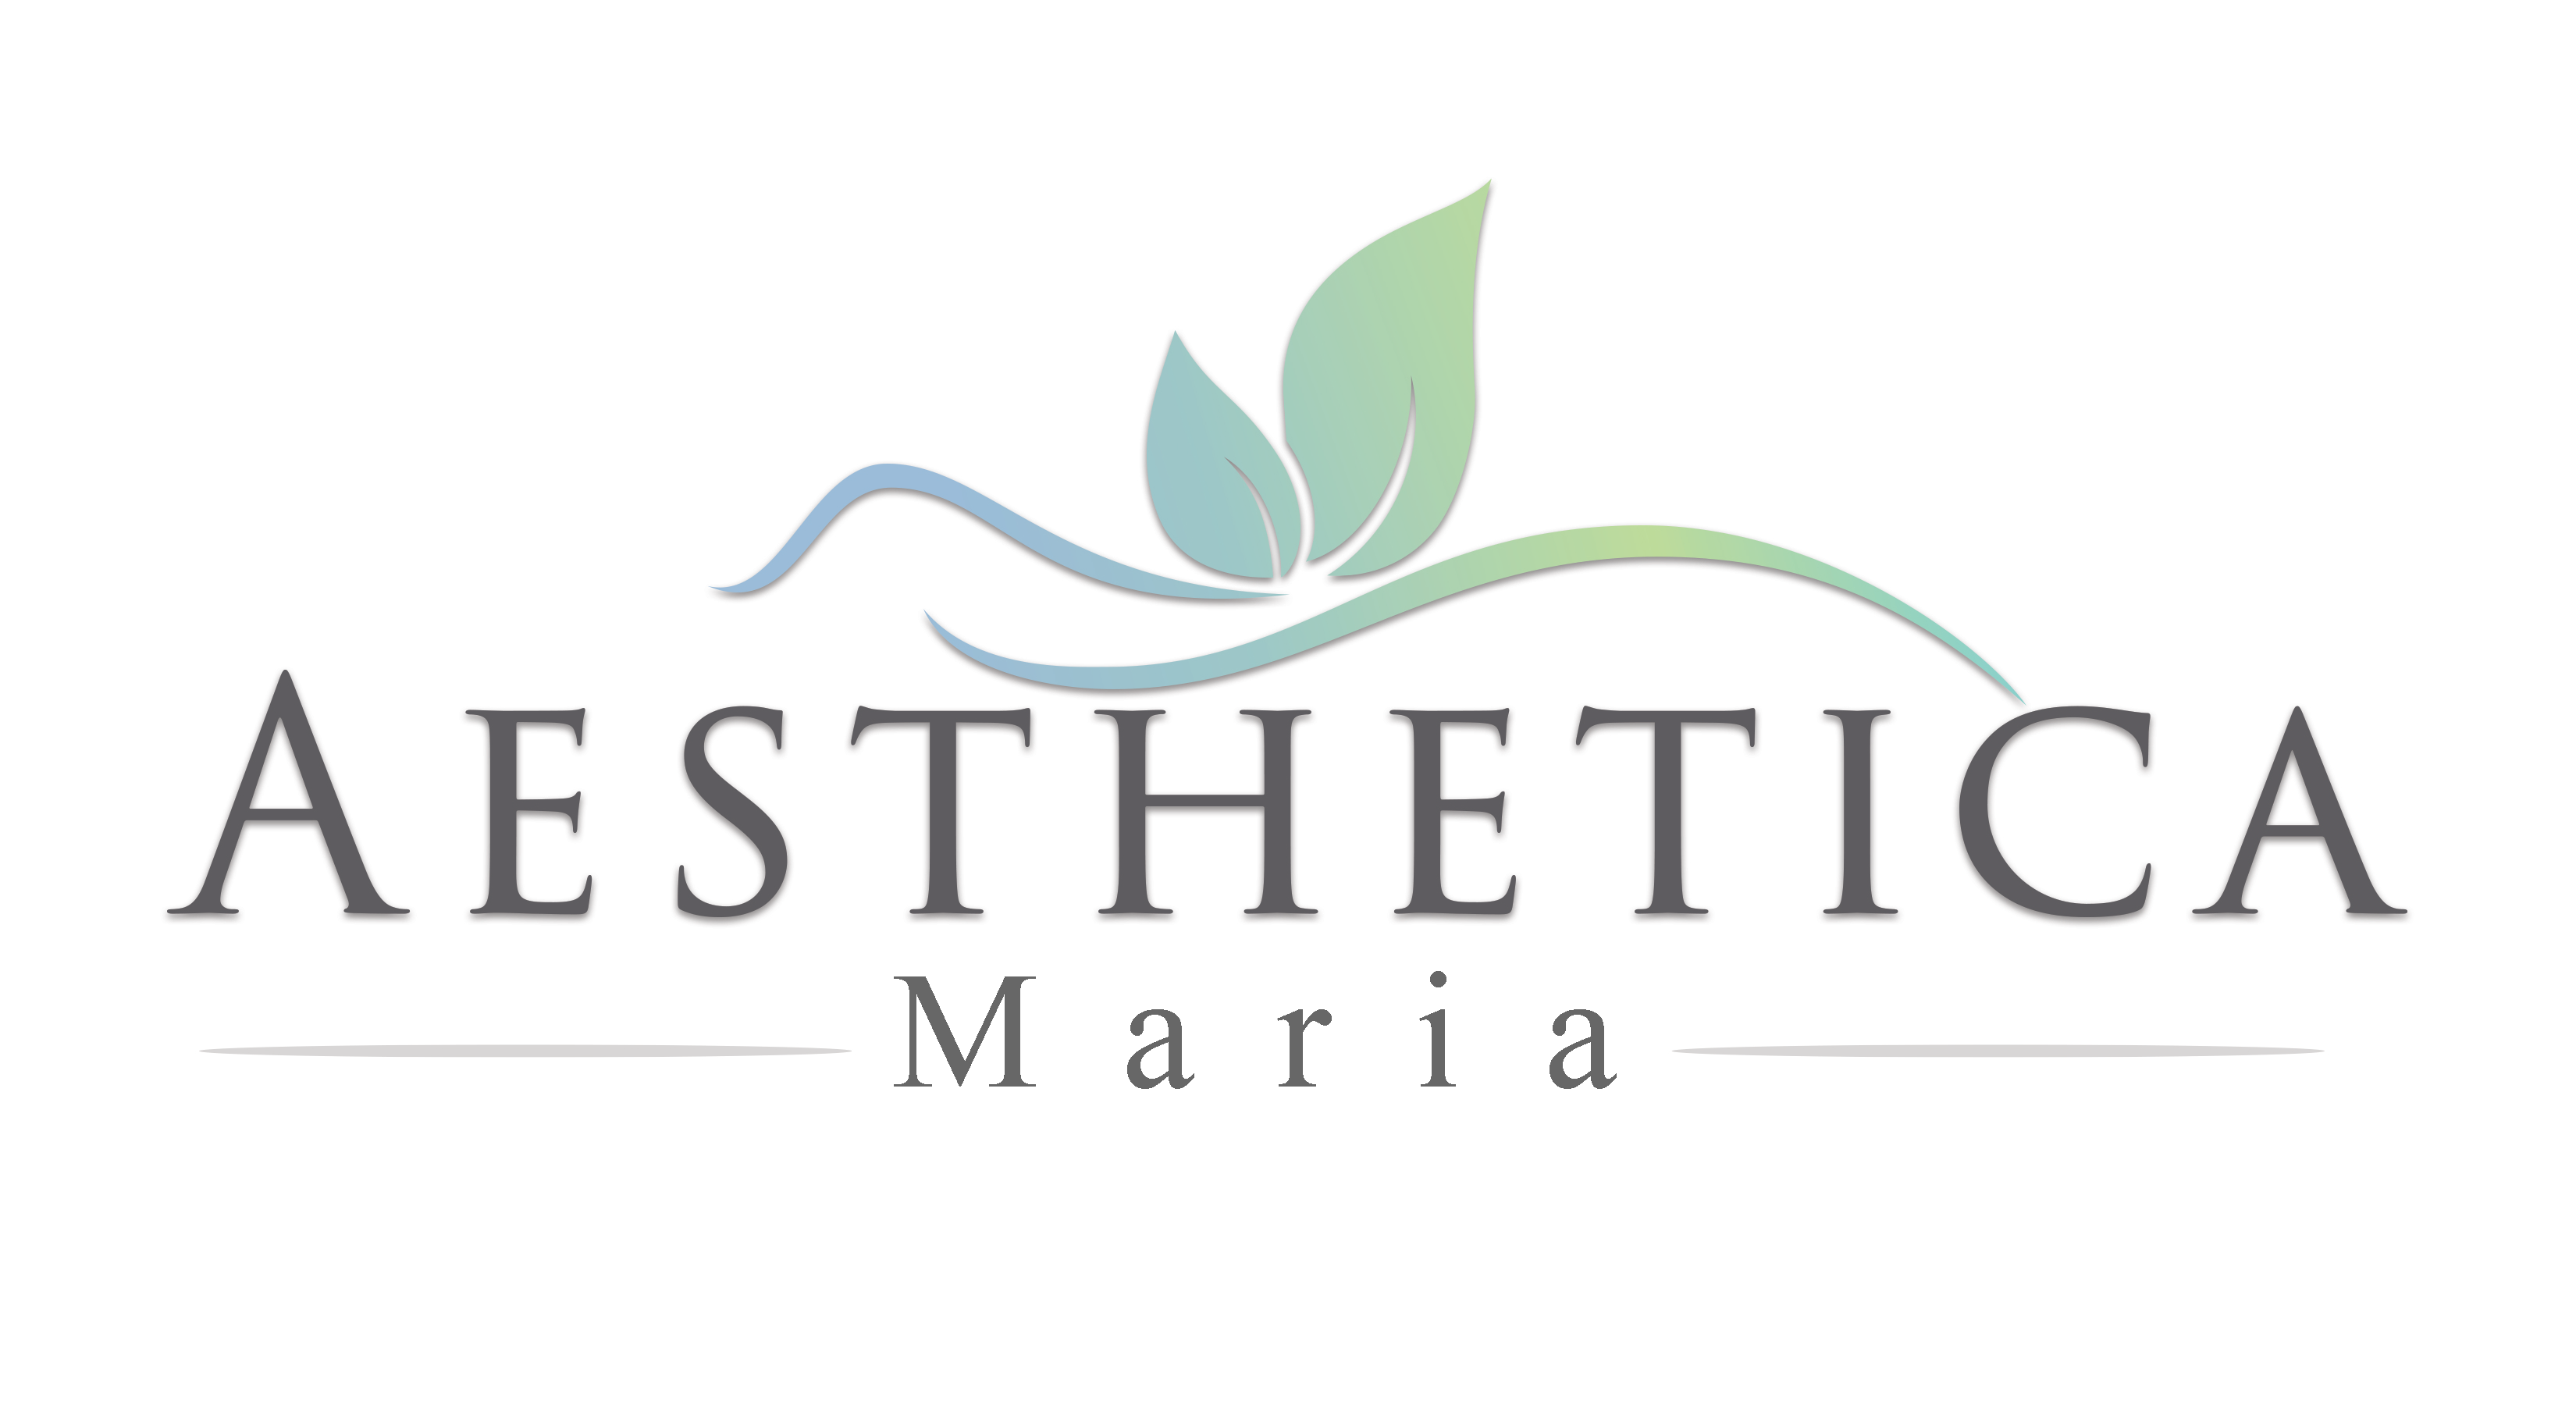 Aesthetica Maria-Aesthetica Maria offers a range of professional, safe and non-invasive beauty and skin care services such as Collagen Induction Therapy (CIT) or Microneedling, High Intensity Focused Ultrasound (HIFU) Skin Tightening, Hydrodermabrasion, Diamond Dermabrasion, Korean BB Glow and Facials, Whitening Treatments, Scalp Micropigmentation (SMP), Tattoo Removal/Lightening, Henna Brows, Lash Lift & Tint and the world's most renowned and sought-after PhiBrows Microblading.